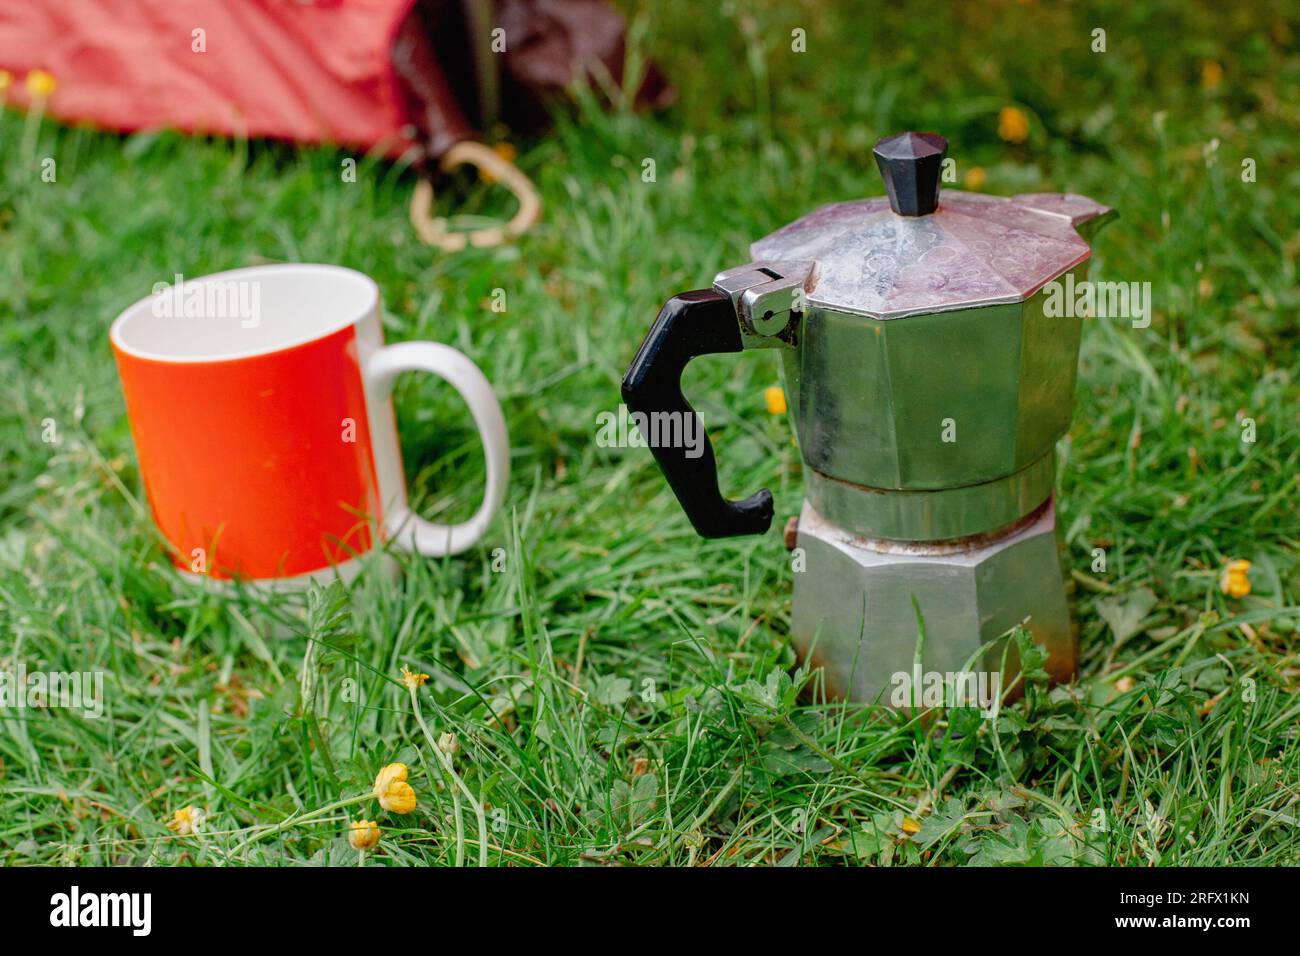 Italian coffee maker with cup on grass Stock Photo